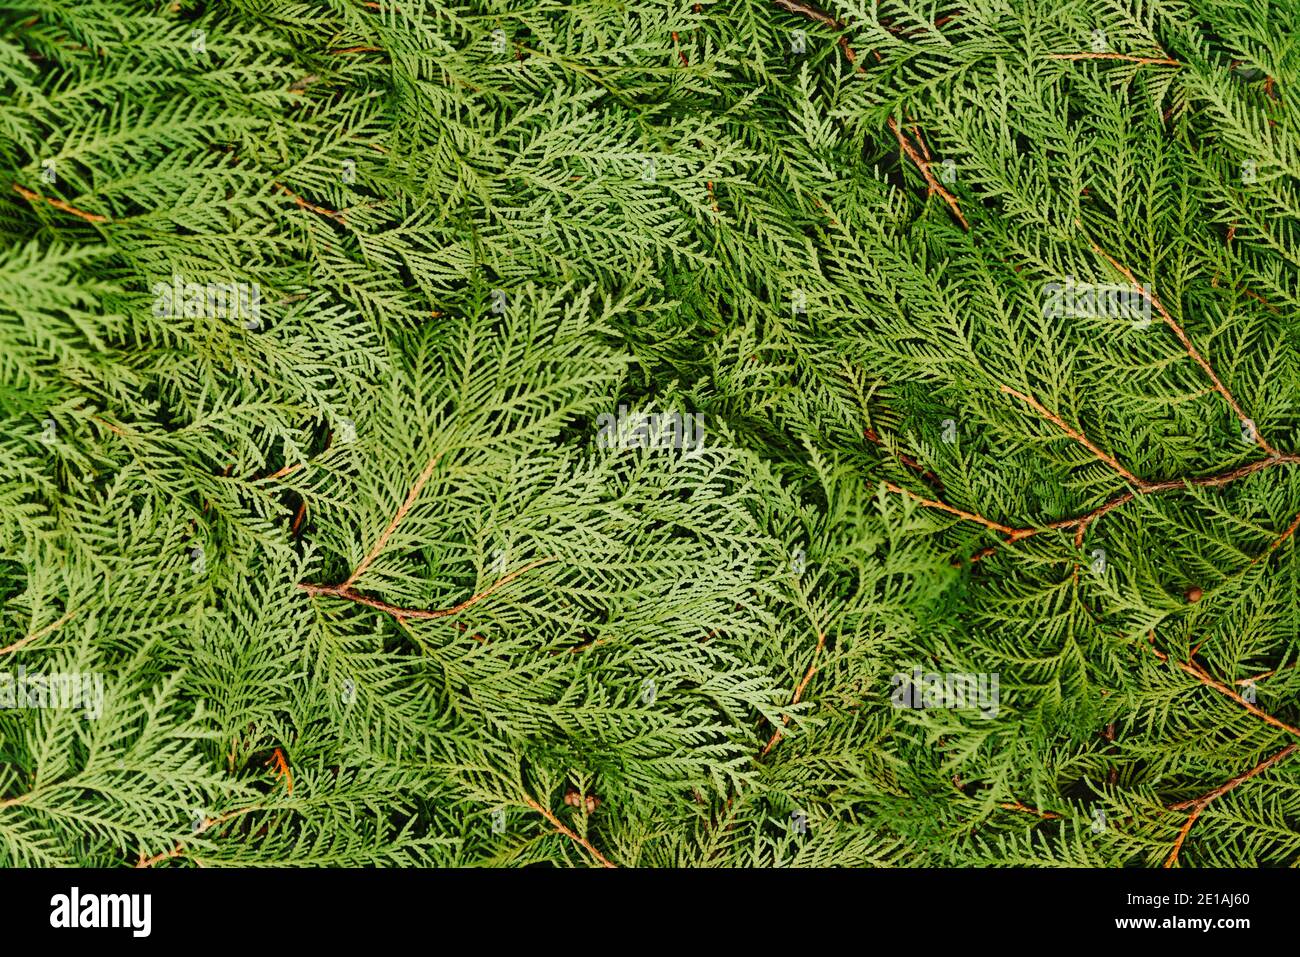 Top view of fresh green tuja branches. Abstract natural green textured background Stock Photo